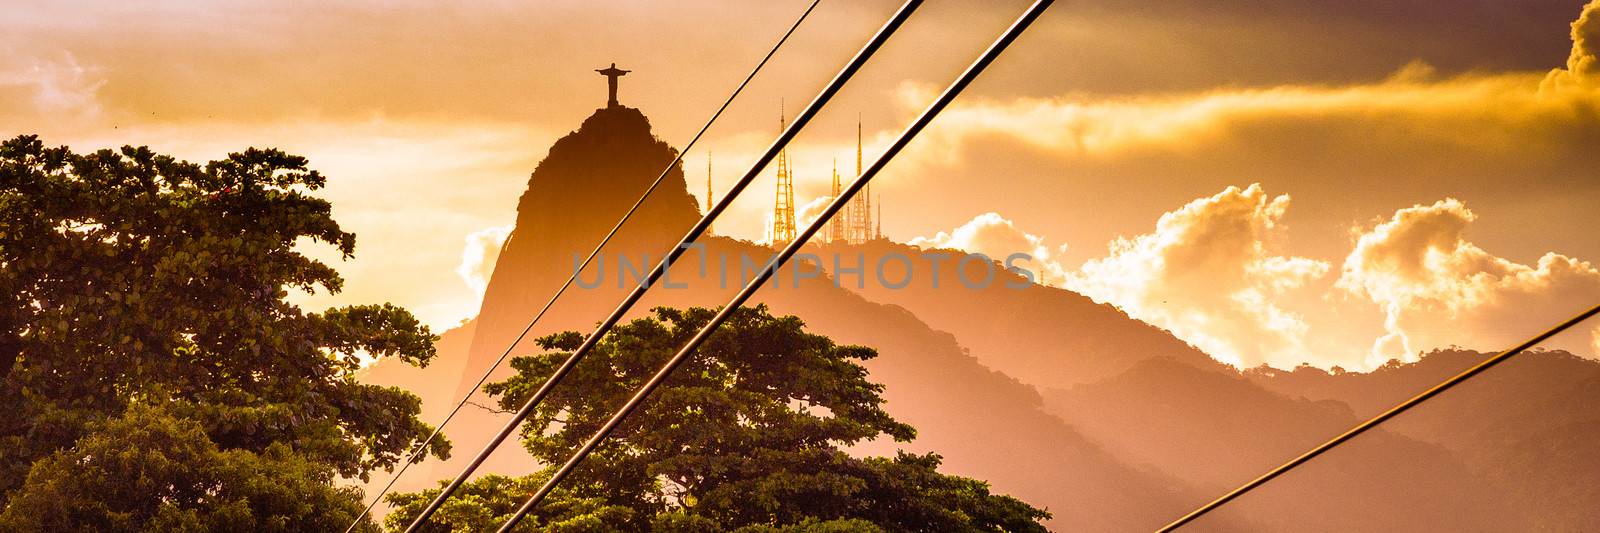 Christ The Redeemer by CelsoDiniz